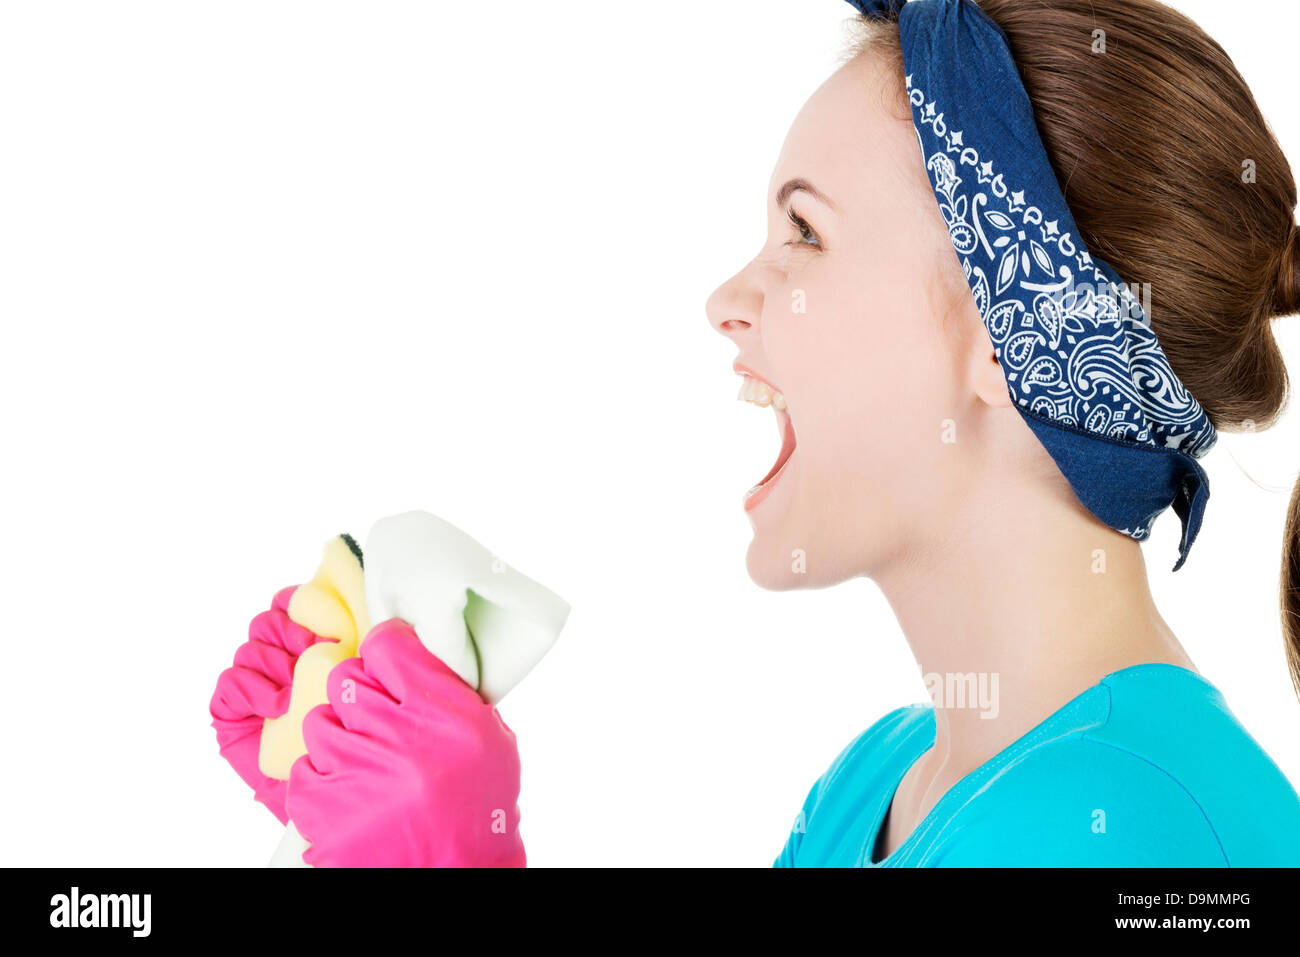 Tired and exhausted cleaning woman screaming loud Stock Photo